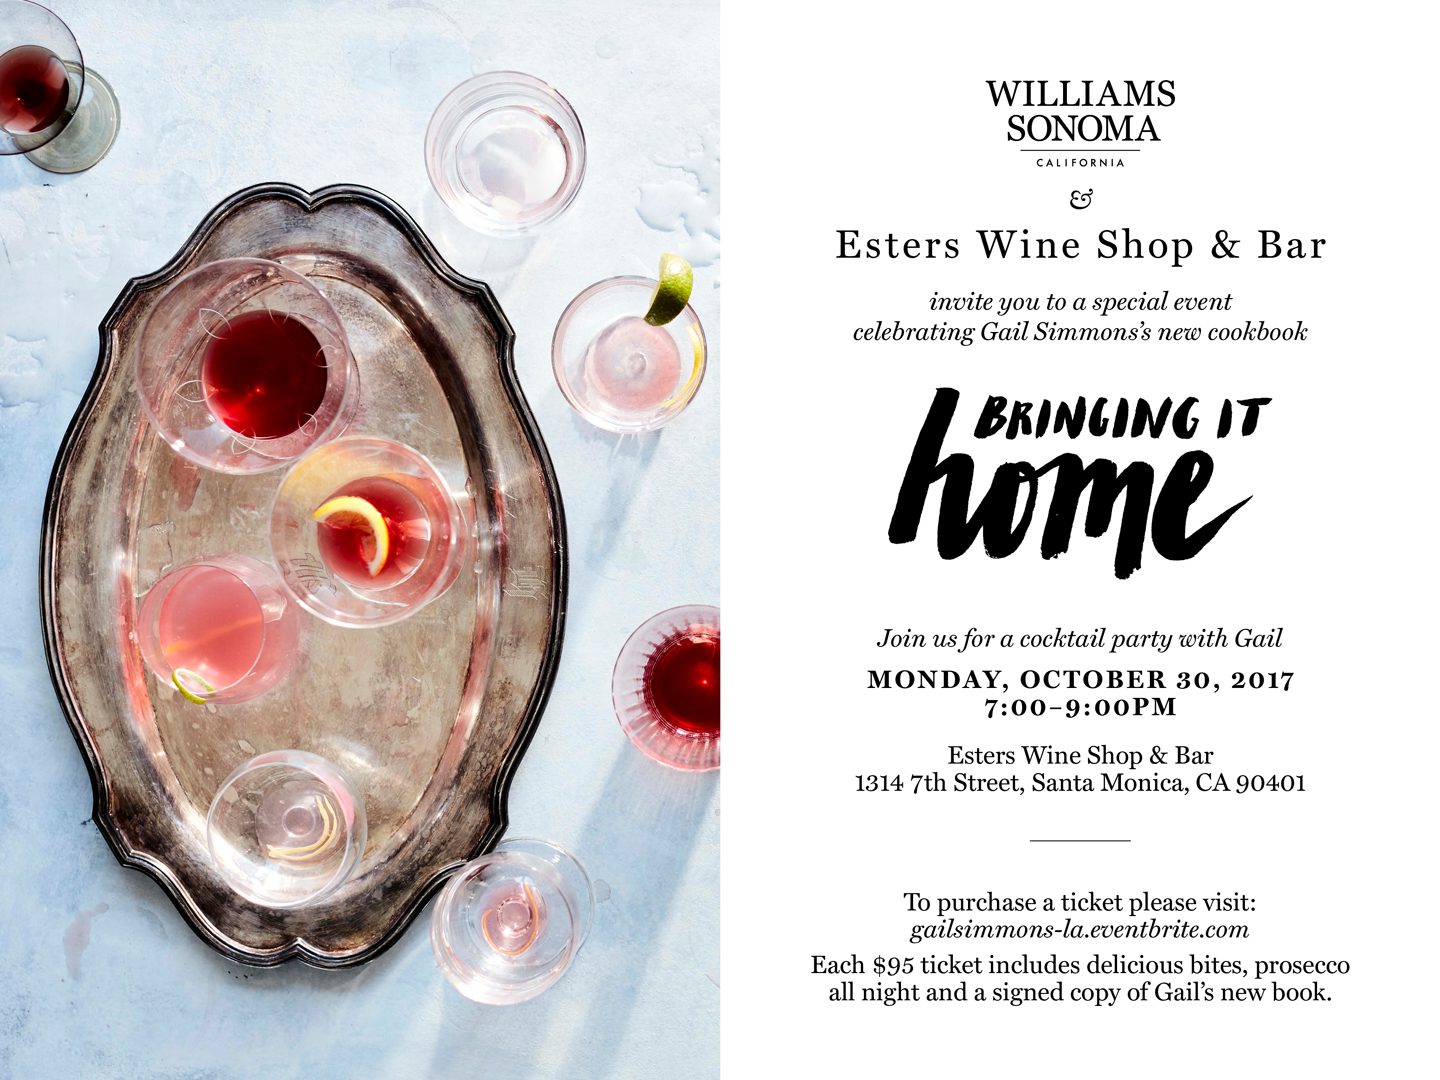 Williams Sonoma Presents Gail Simmons's Bringing It Home Cookbook Party